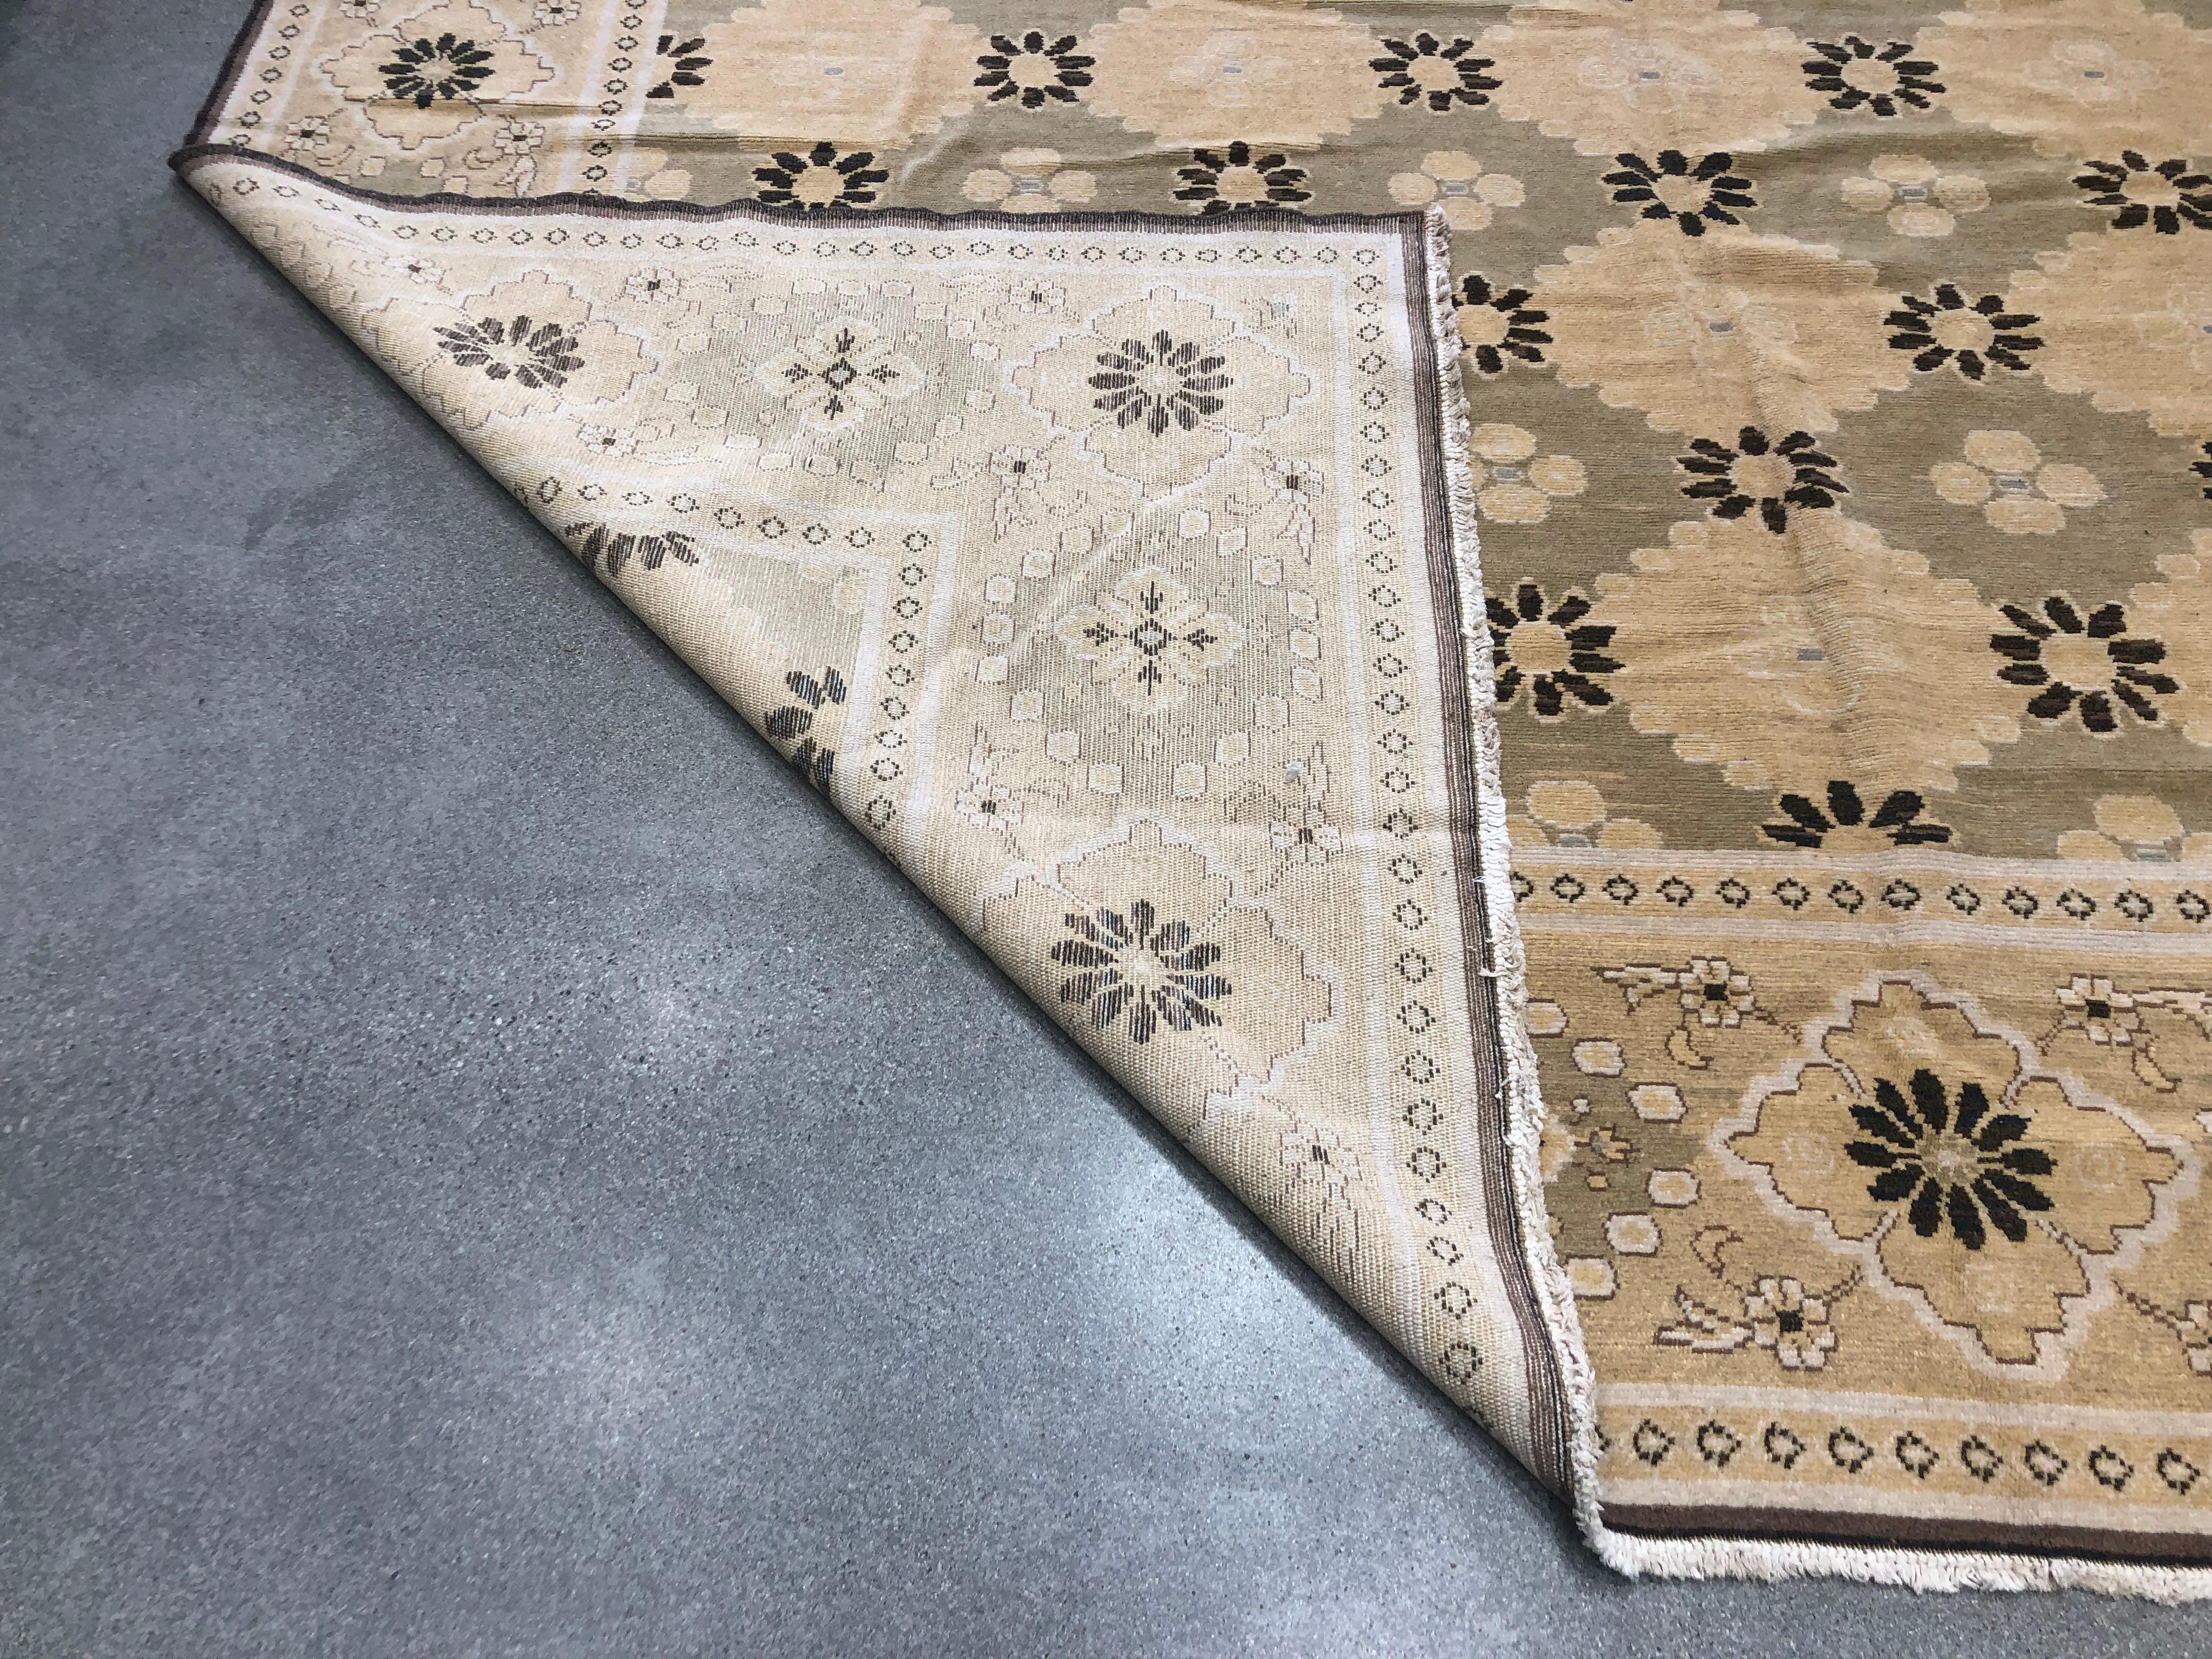 European Design Rug in Taupe and Gold In Excellent Condition For Sale In Los Angeles, CA